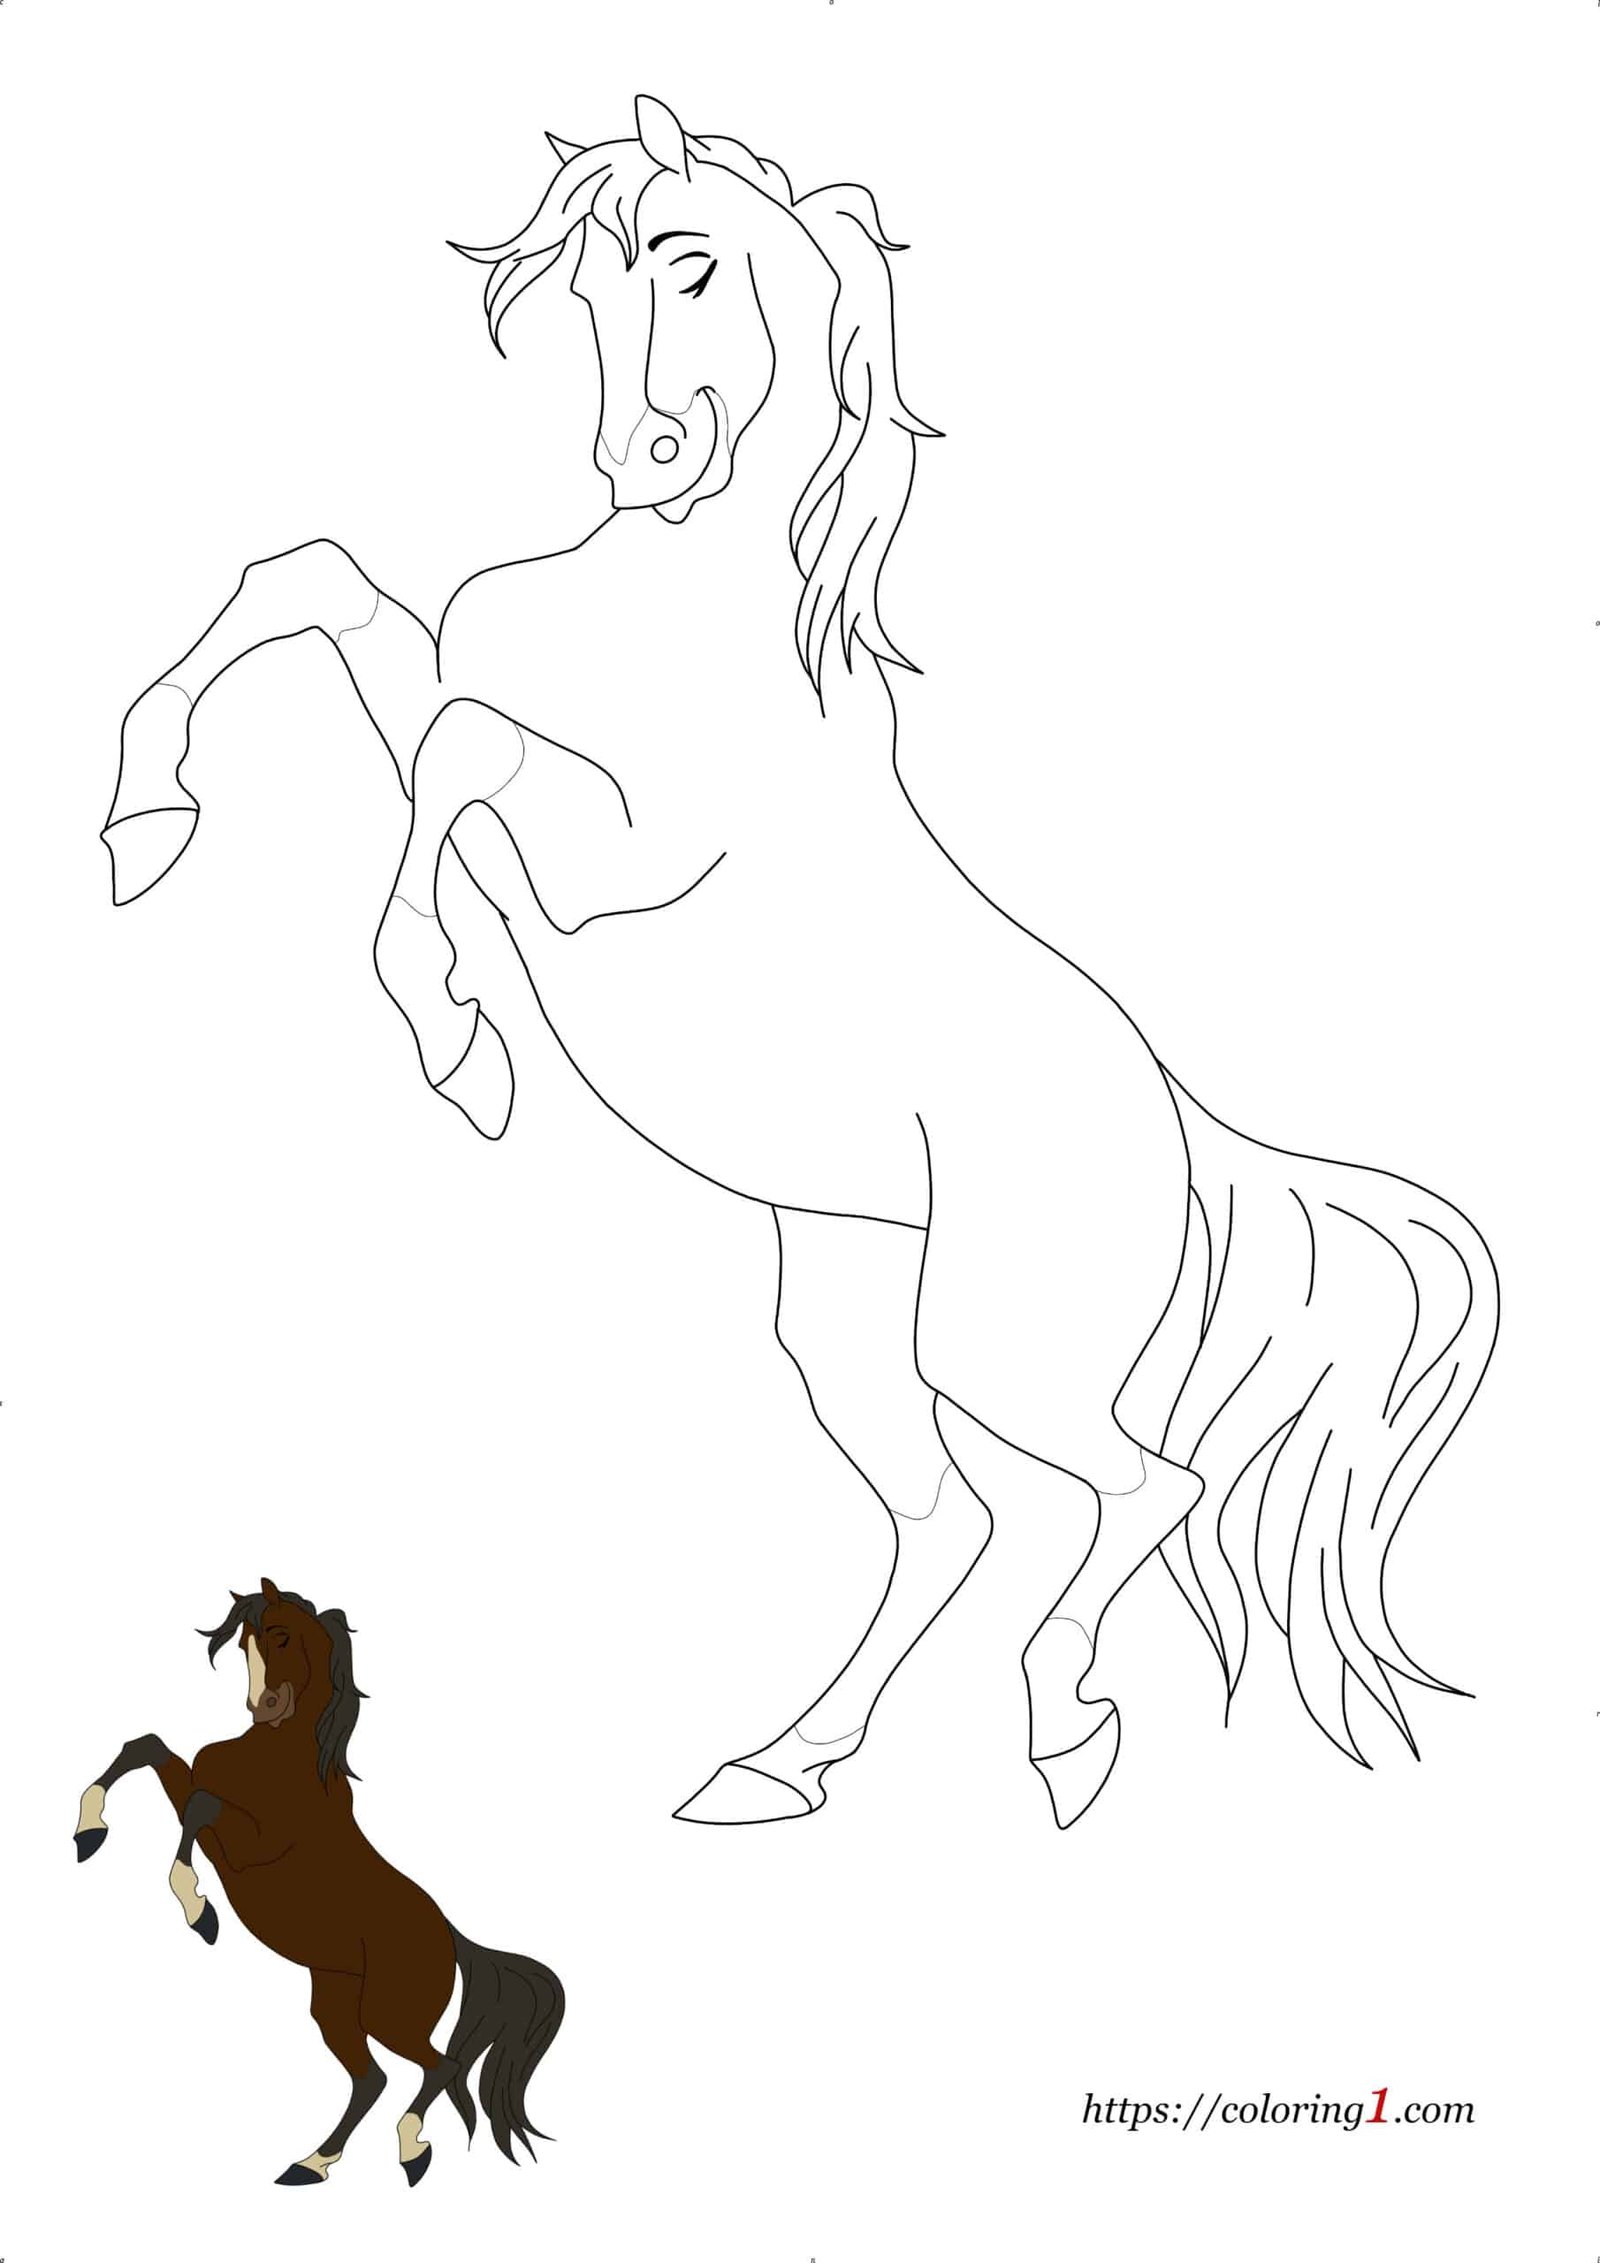 Detailed Horse free coloring page to print with sample